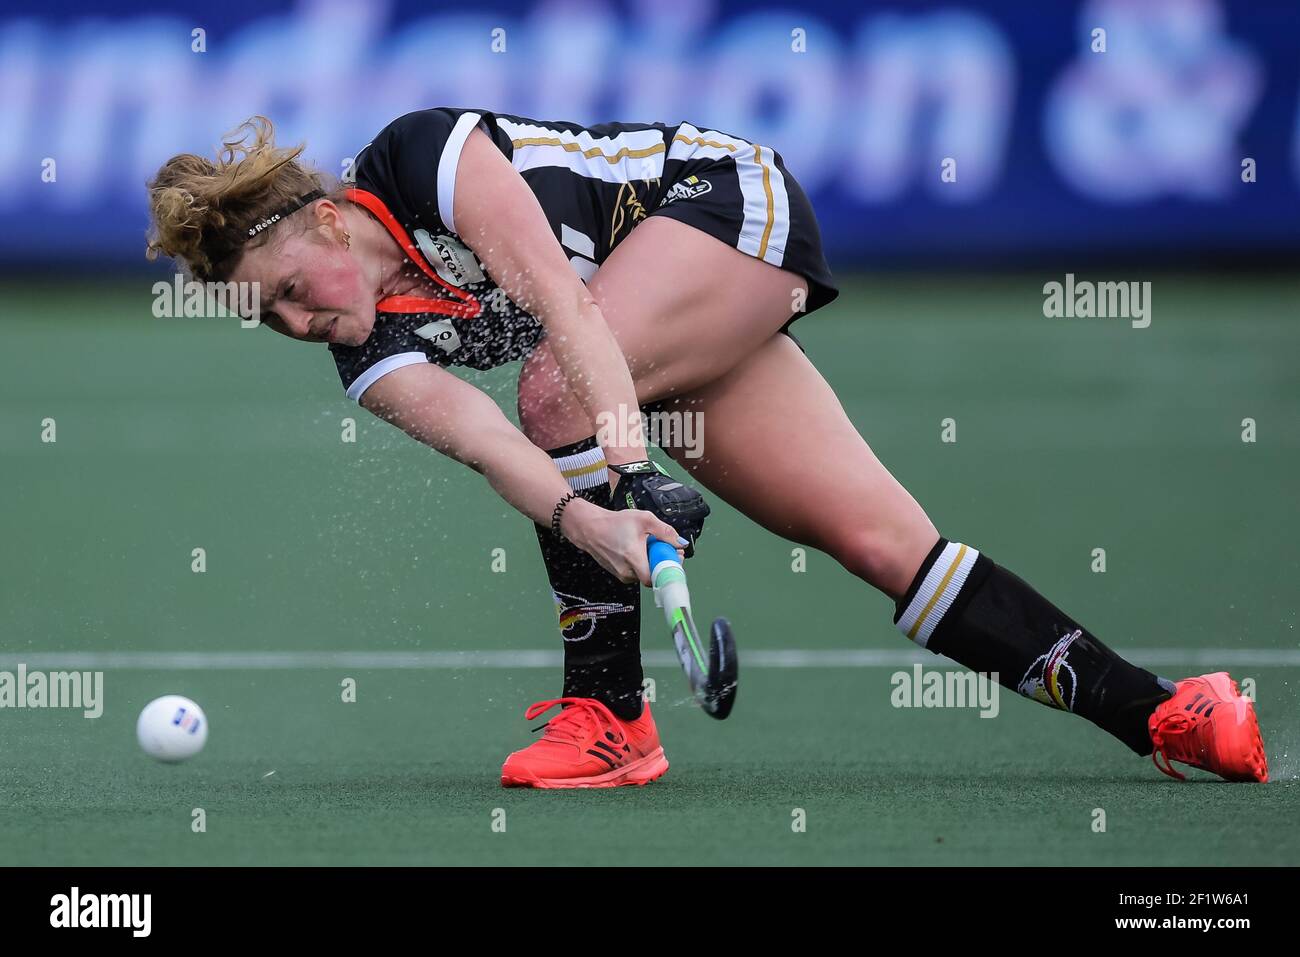 AMSTELVEEN, NETHERLANDS - MARCH 6: Maike Schaunig of Germany during the FIH Pro League match between Netherlands Women and Germany Women at Wagener St Stock Photo